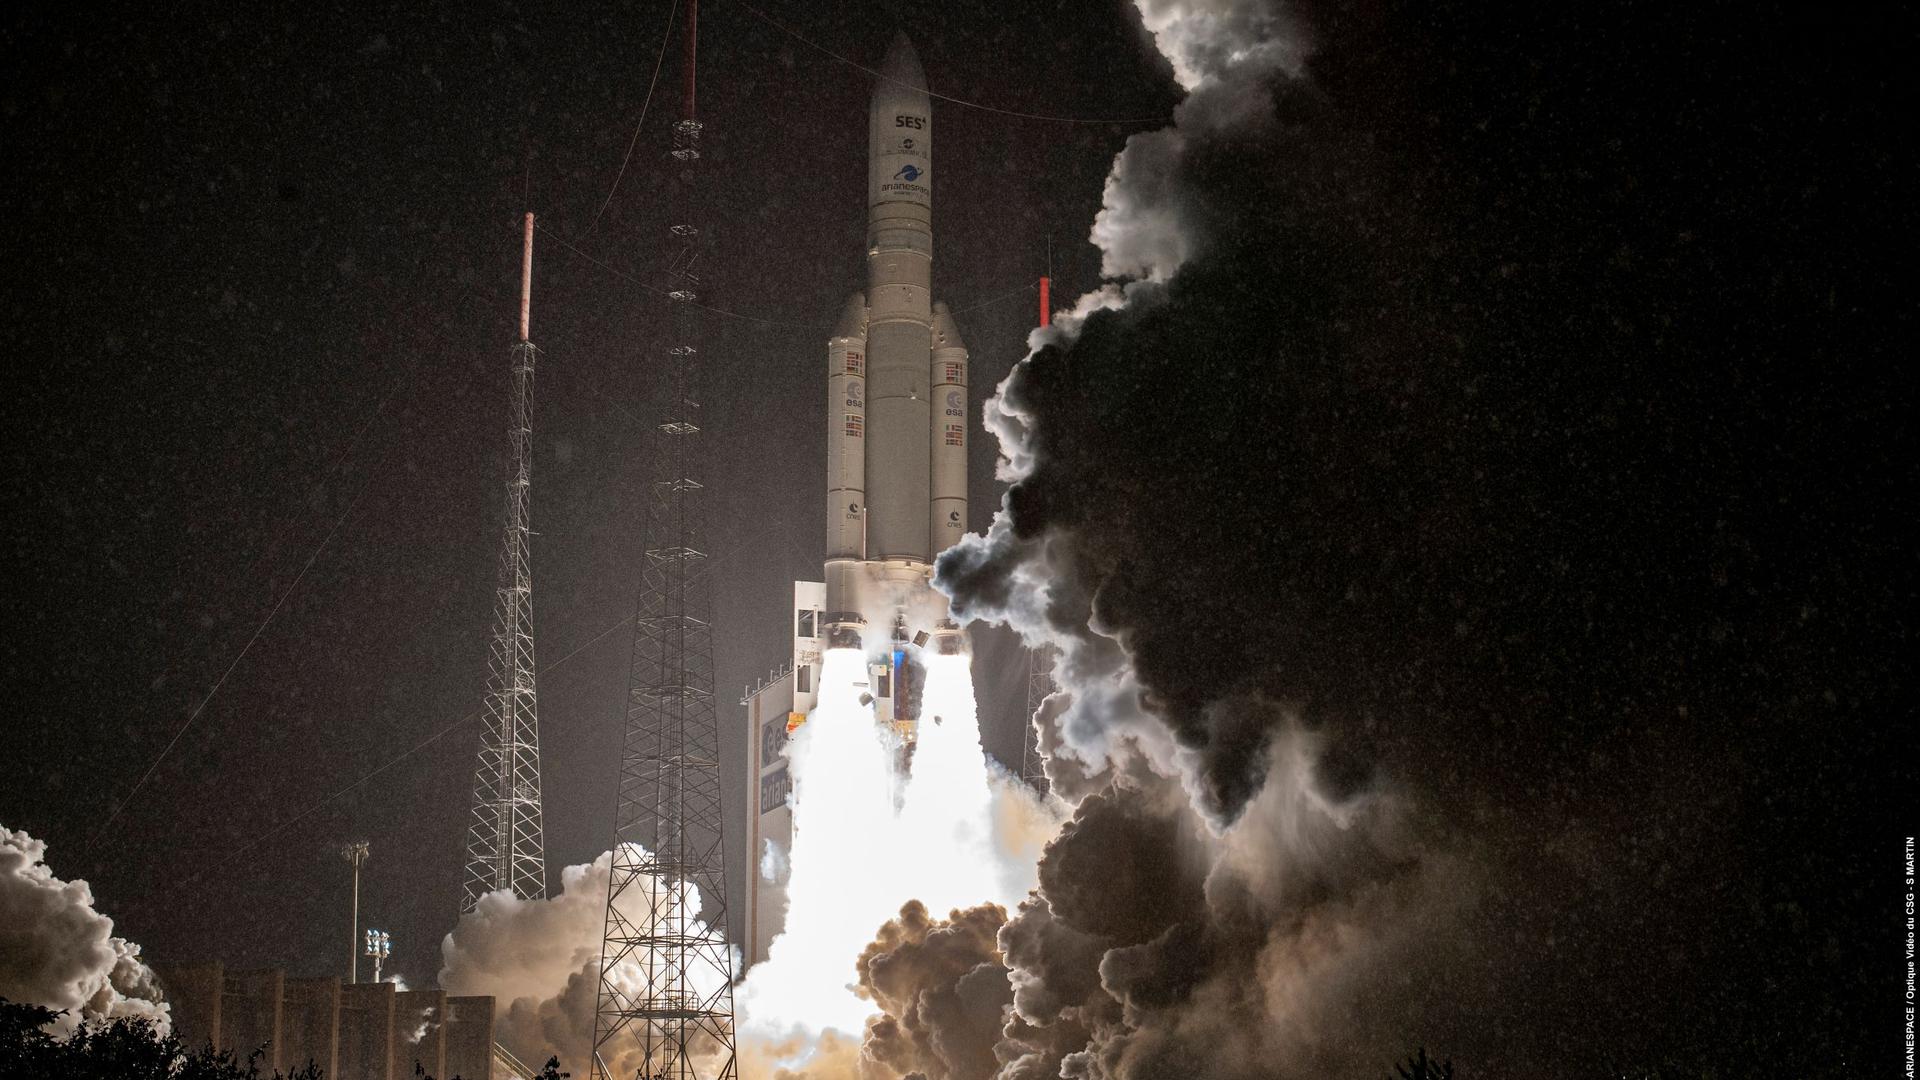 A rocket carrying SES's latest and largest satellite blasted off from French Guiana in October